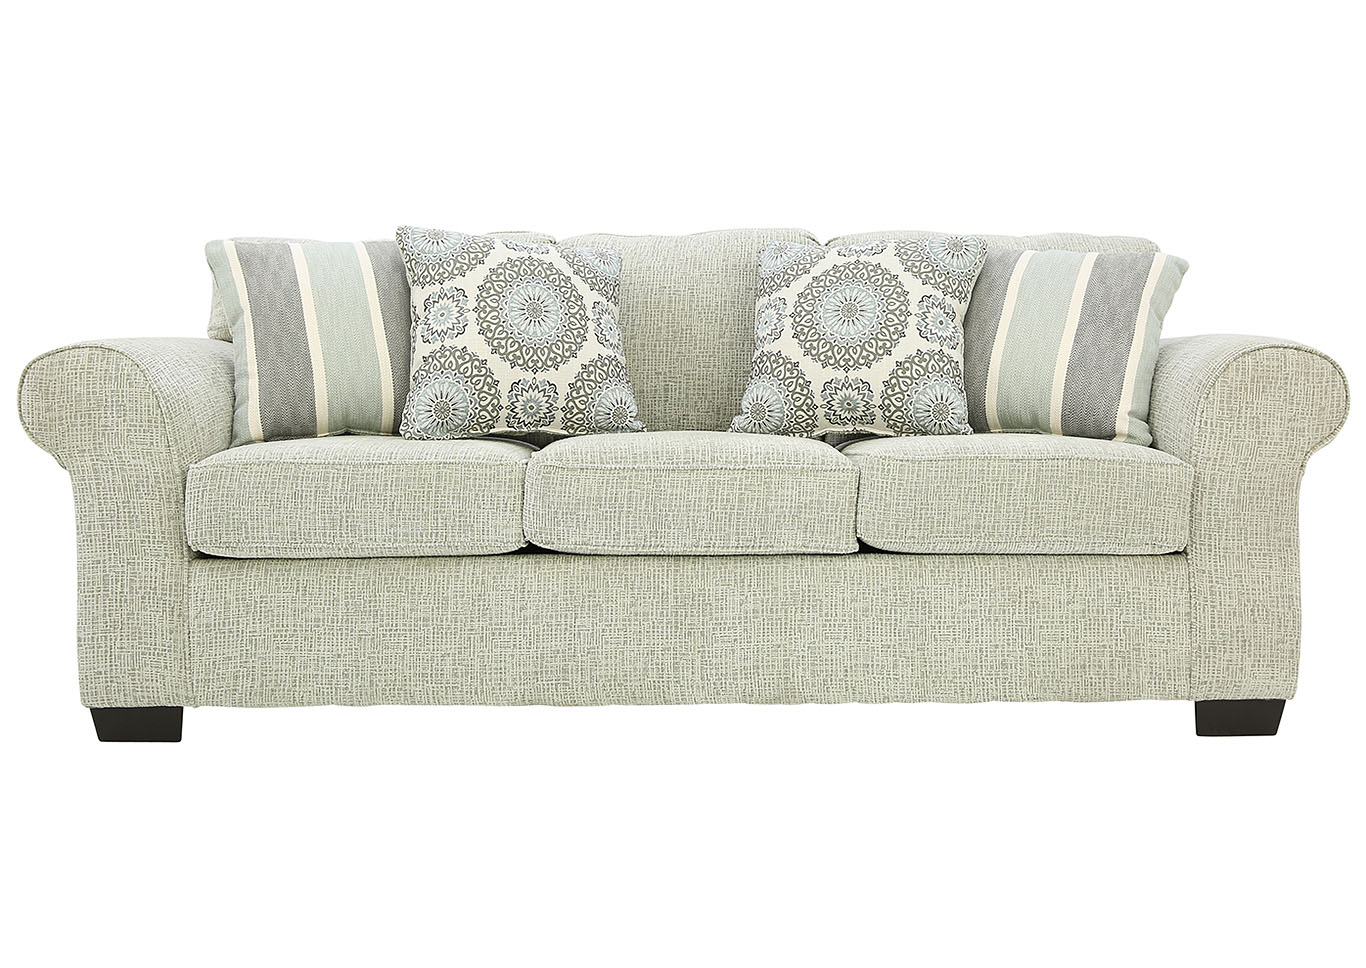 Affordable Furniture Charisma Linen Queen Sleeper Sofa And